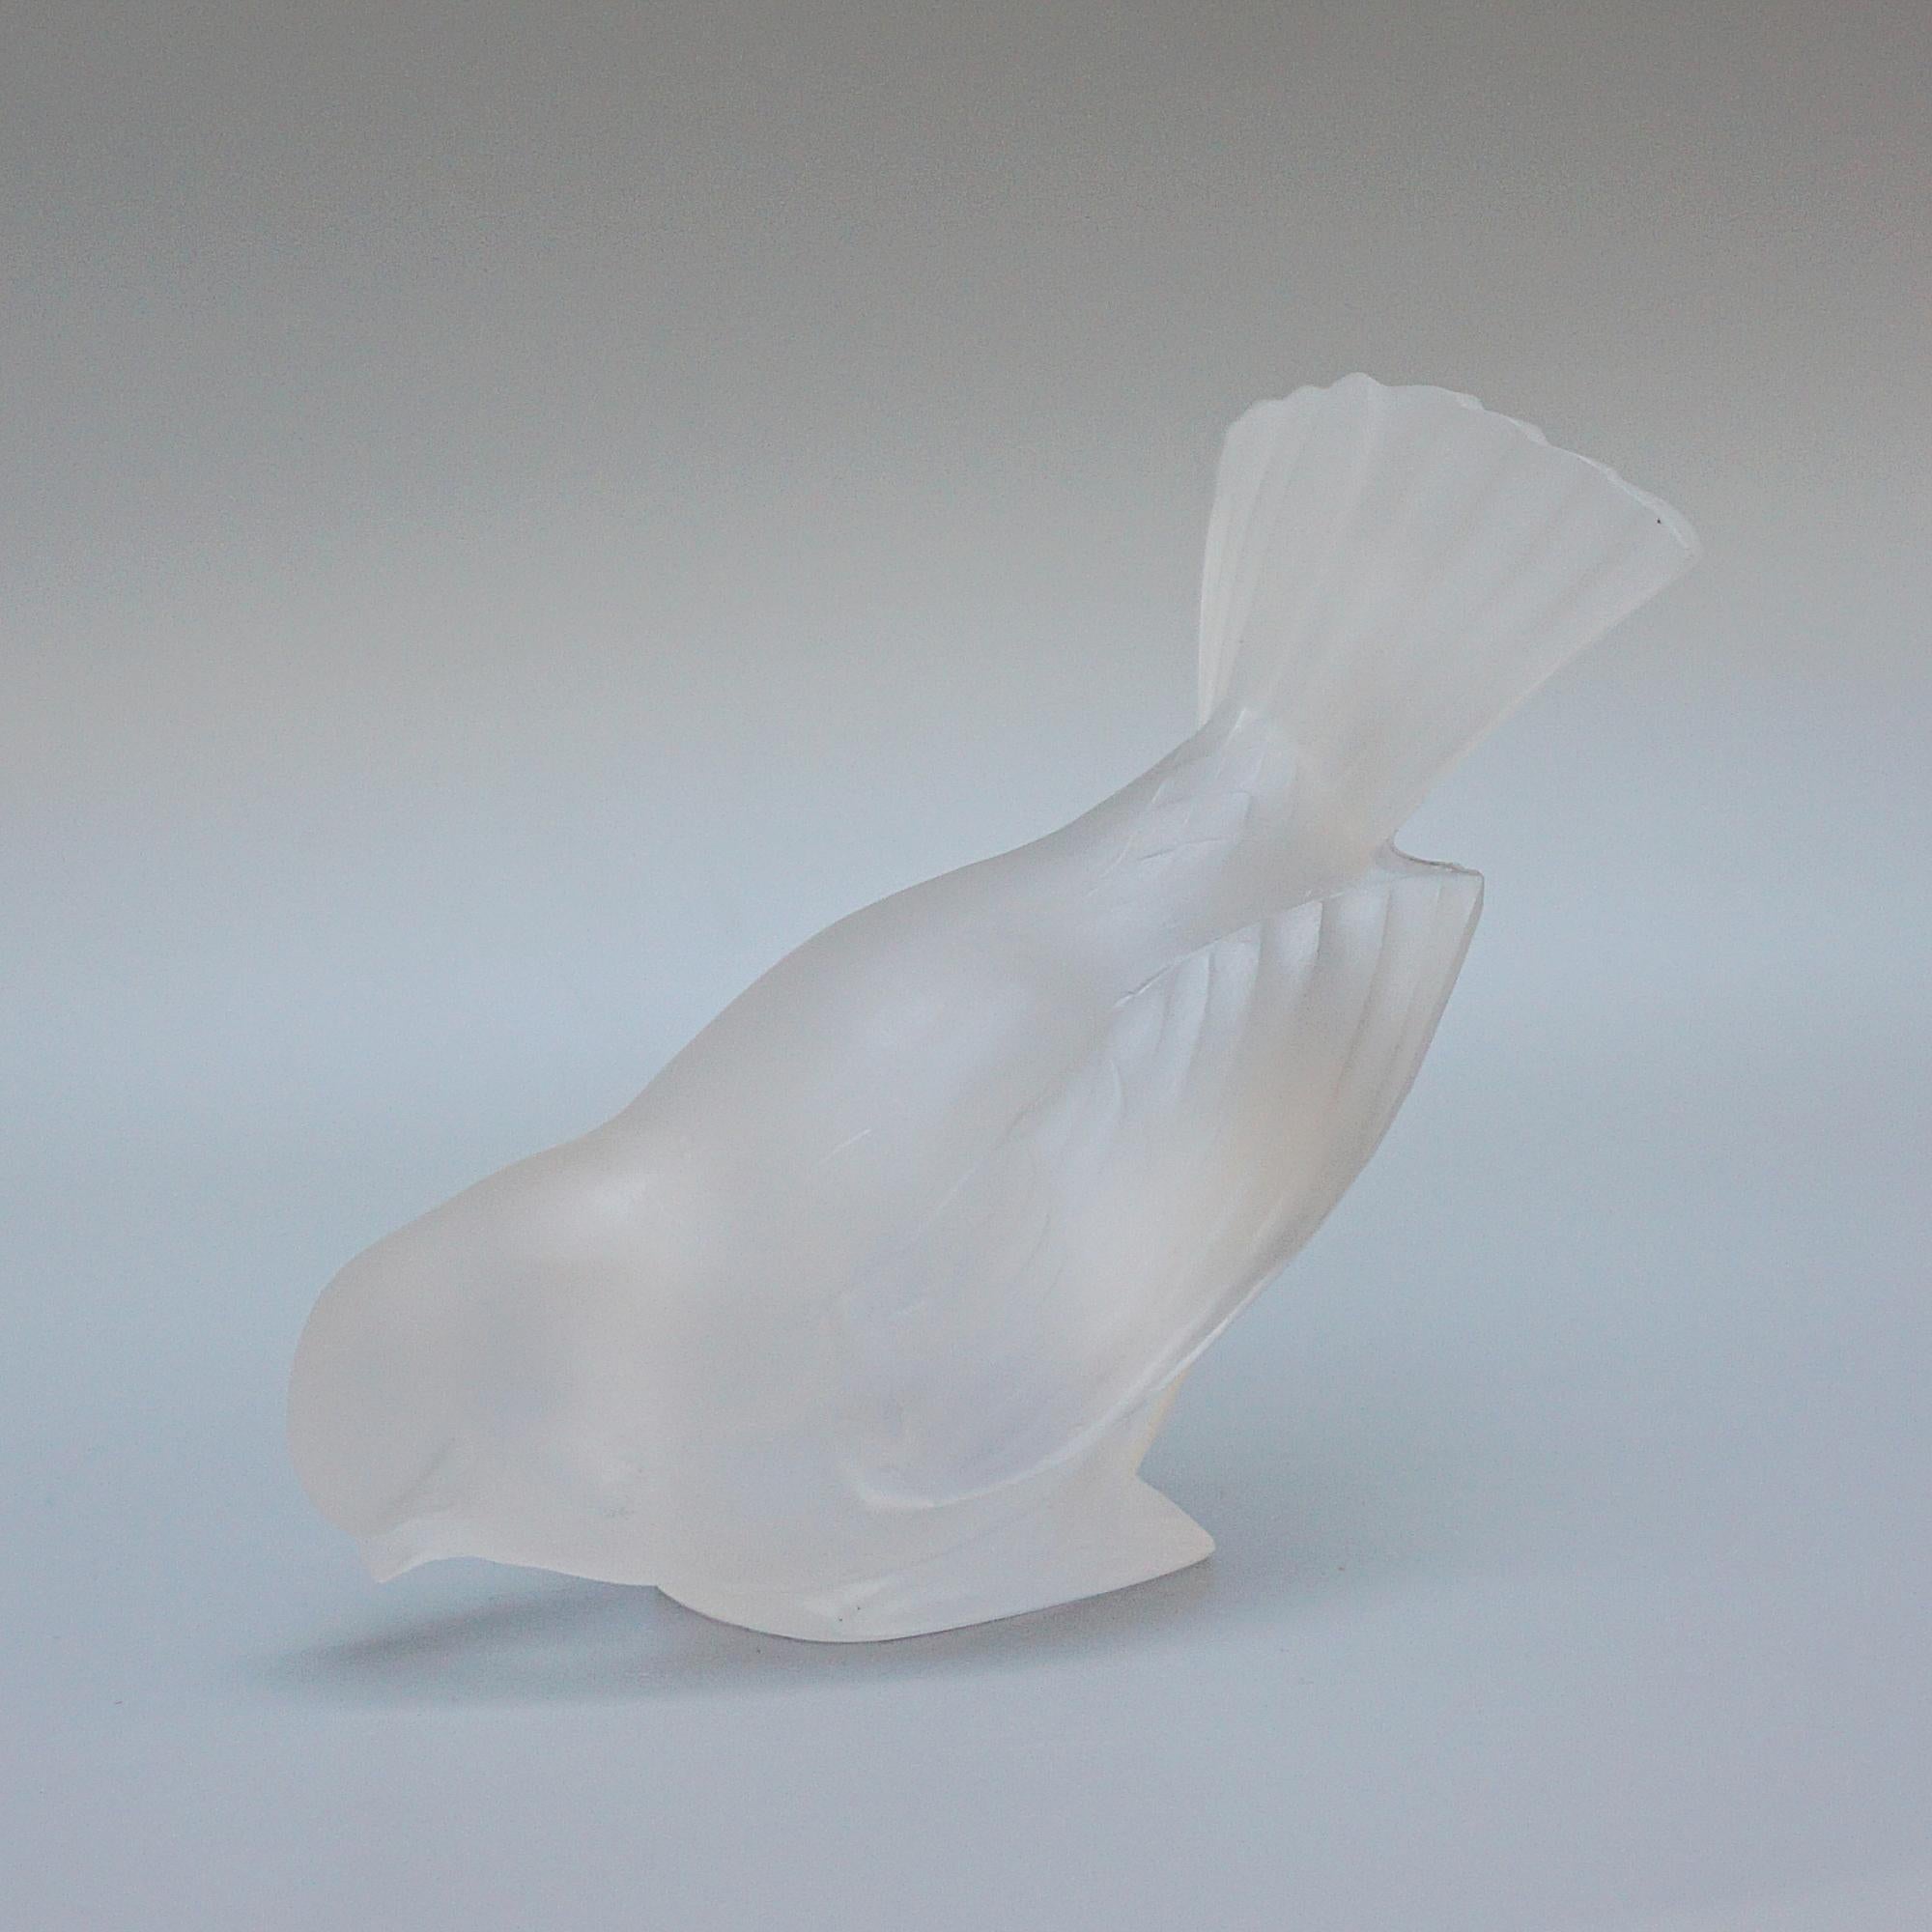 'Moineau Timide' A Glass Paperweight by Marc Lalique (1900 - 1977) For Sale 5